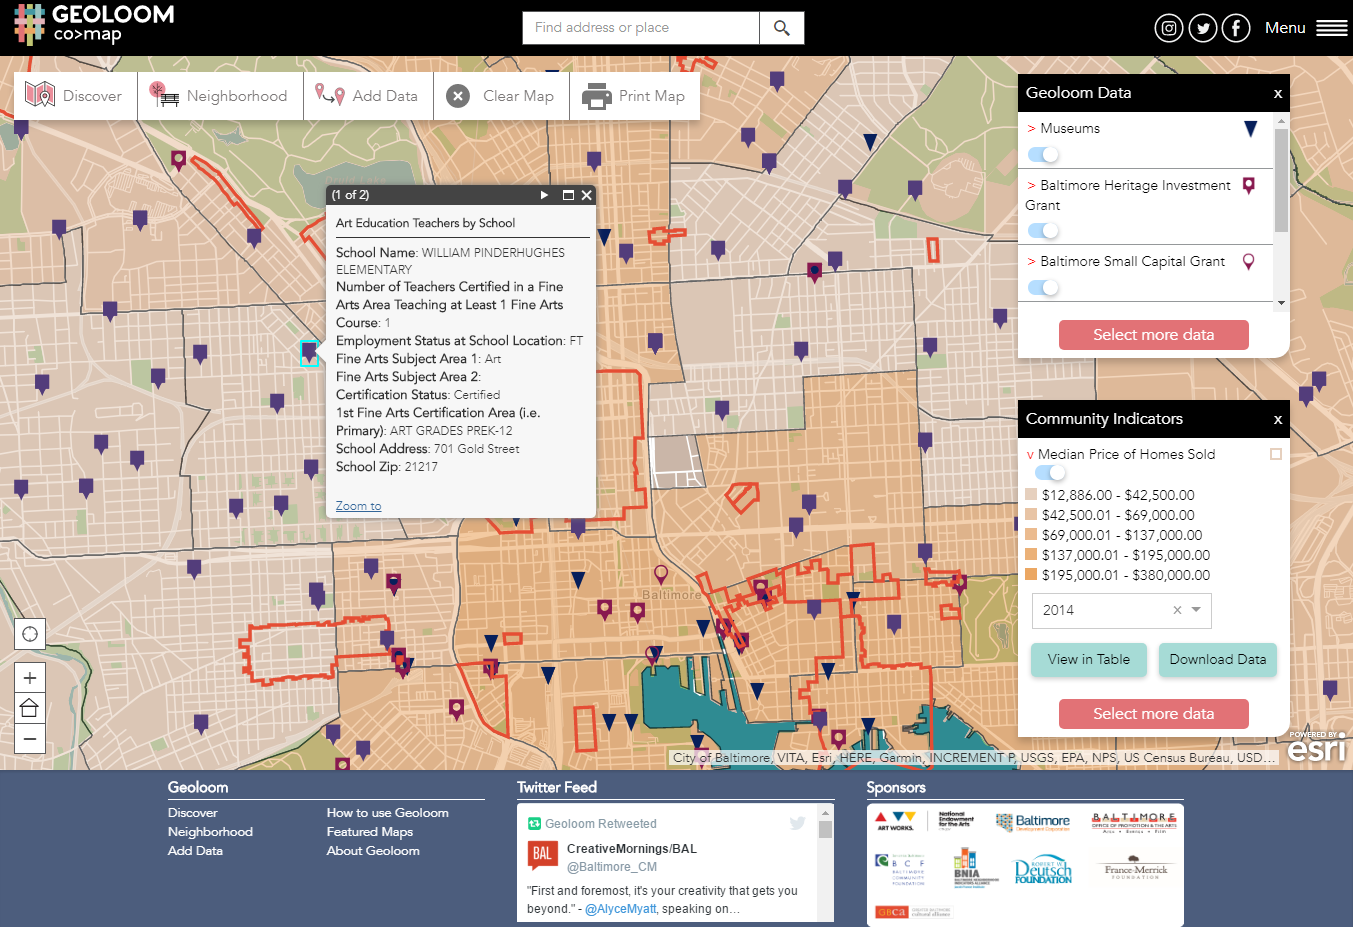 Screenshot of GEOLOOM Median Price of Homes Sold and Locations of various grants